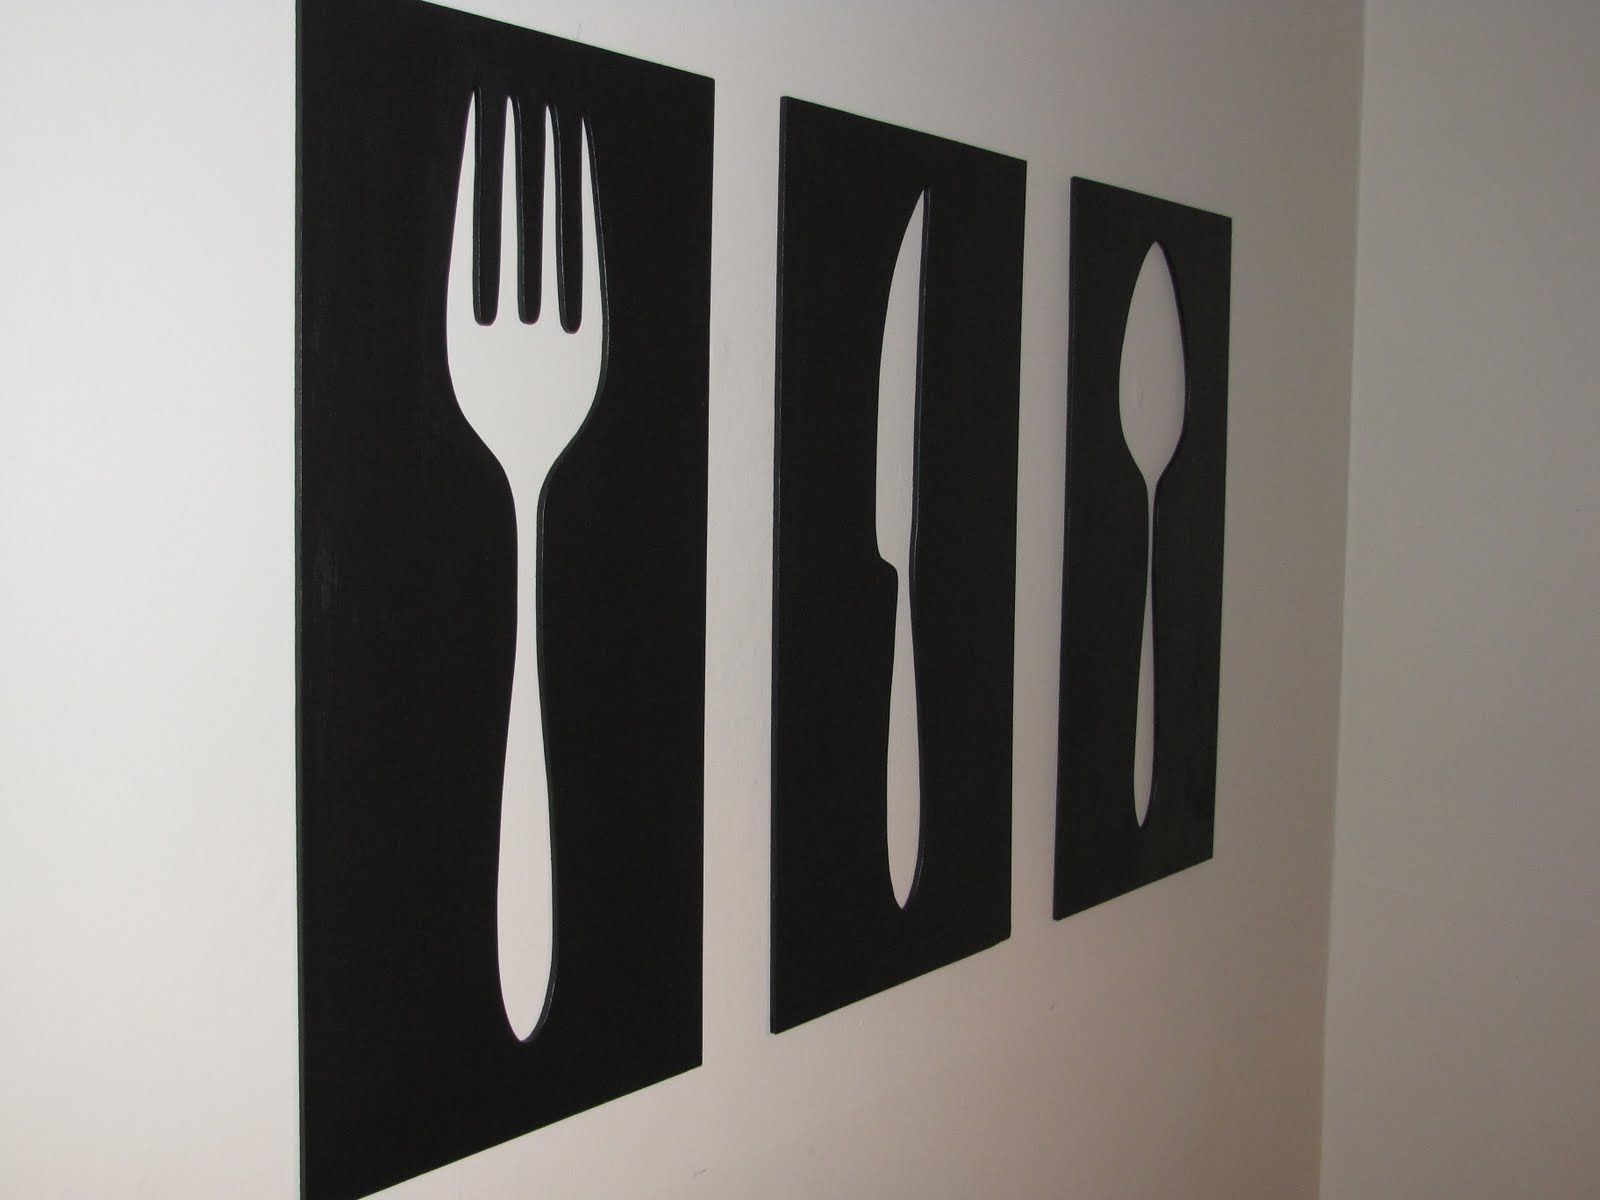 The Best Fork And Spoon Wall Decor Art Home Design Ideas Good Of Inside Fork And Spoon Wall Art (View 20 of 20)